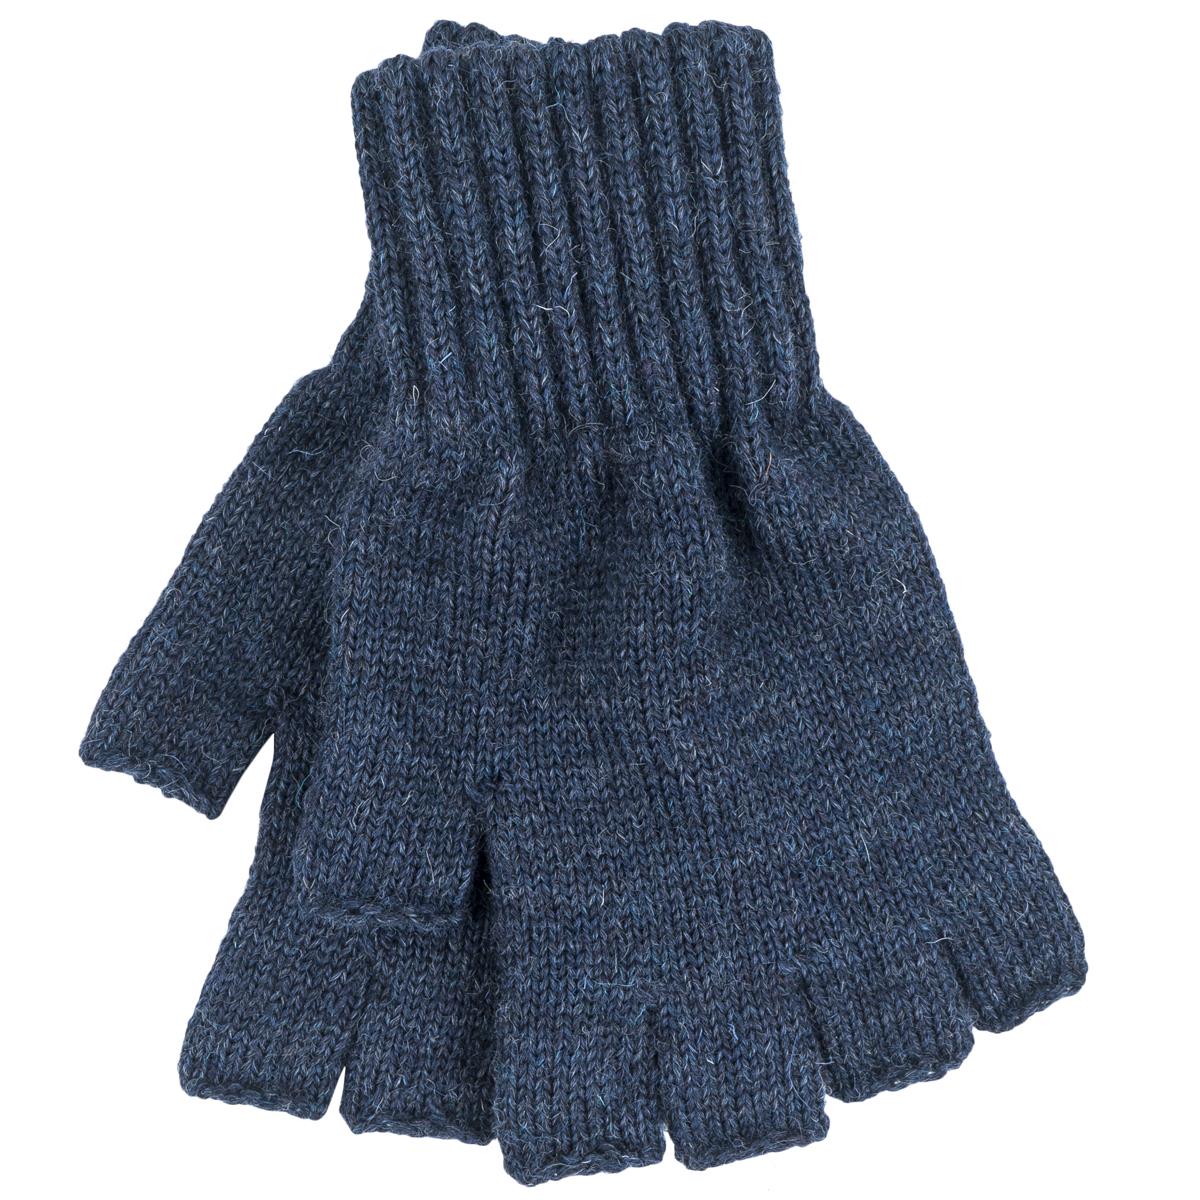 Barbour Mens Knitted Lambswool Fingerless Gloves Questions & Answers